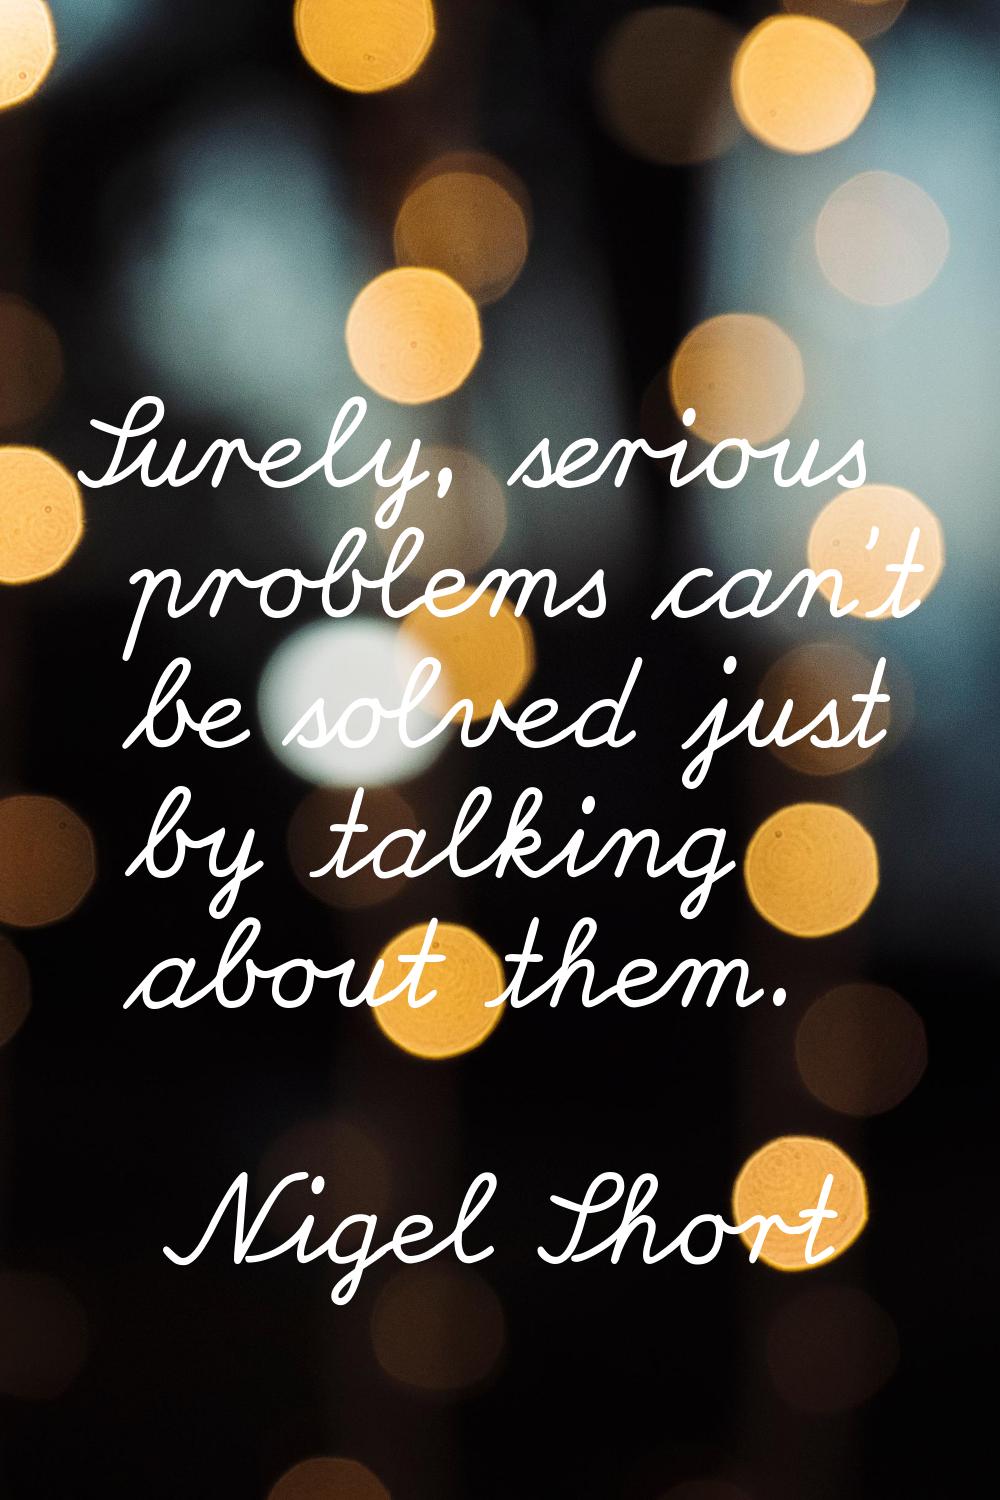 Surely, serious problems can't be solved just by talking about them.